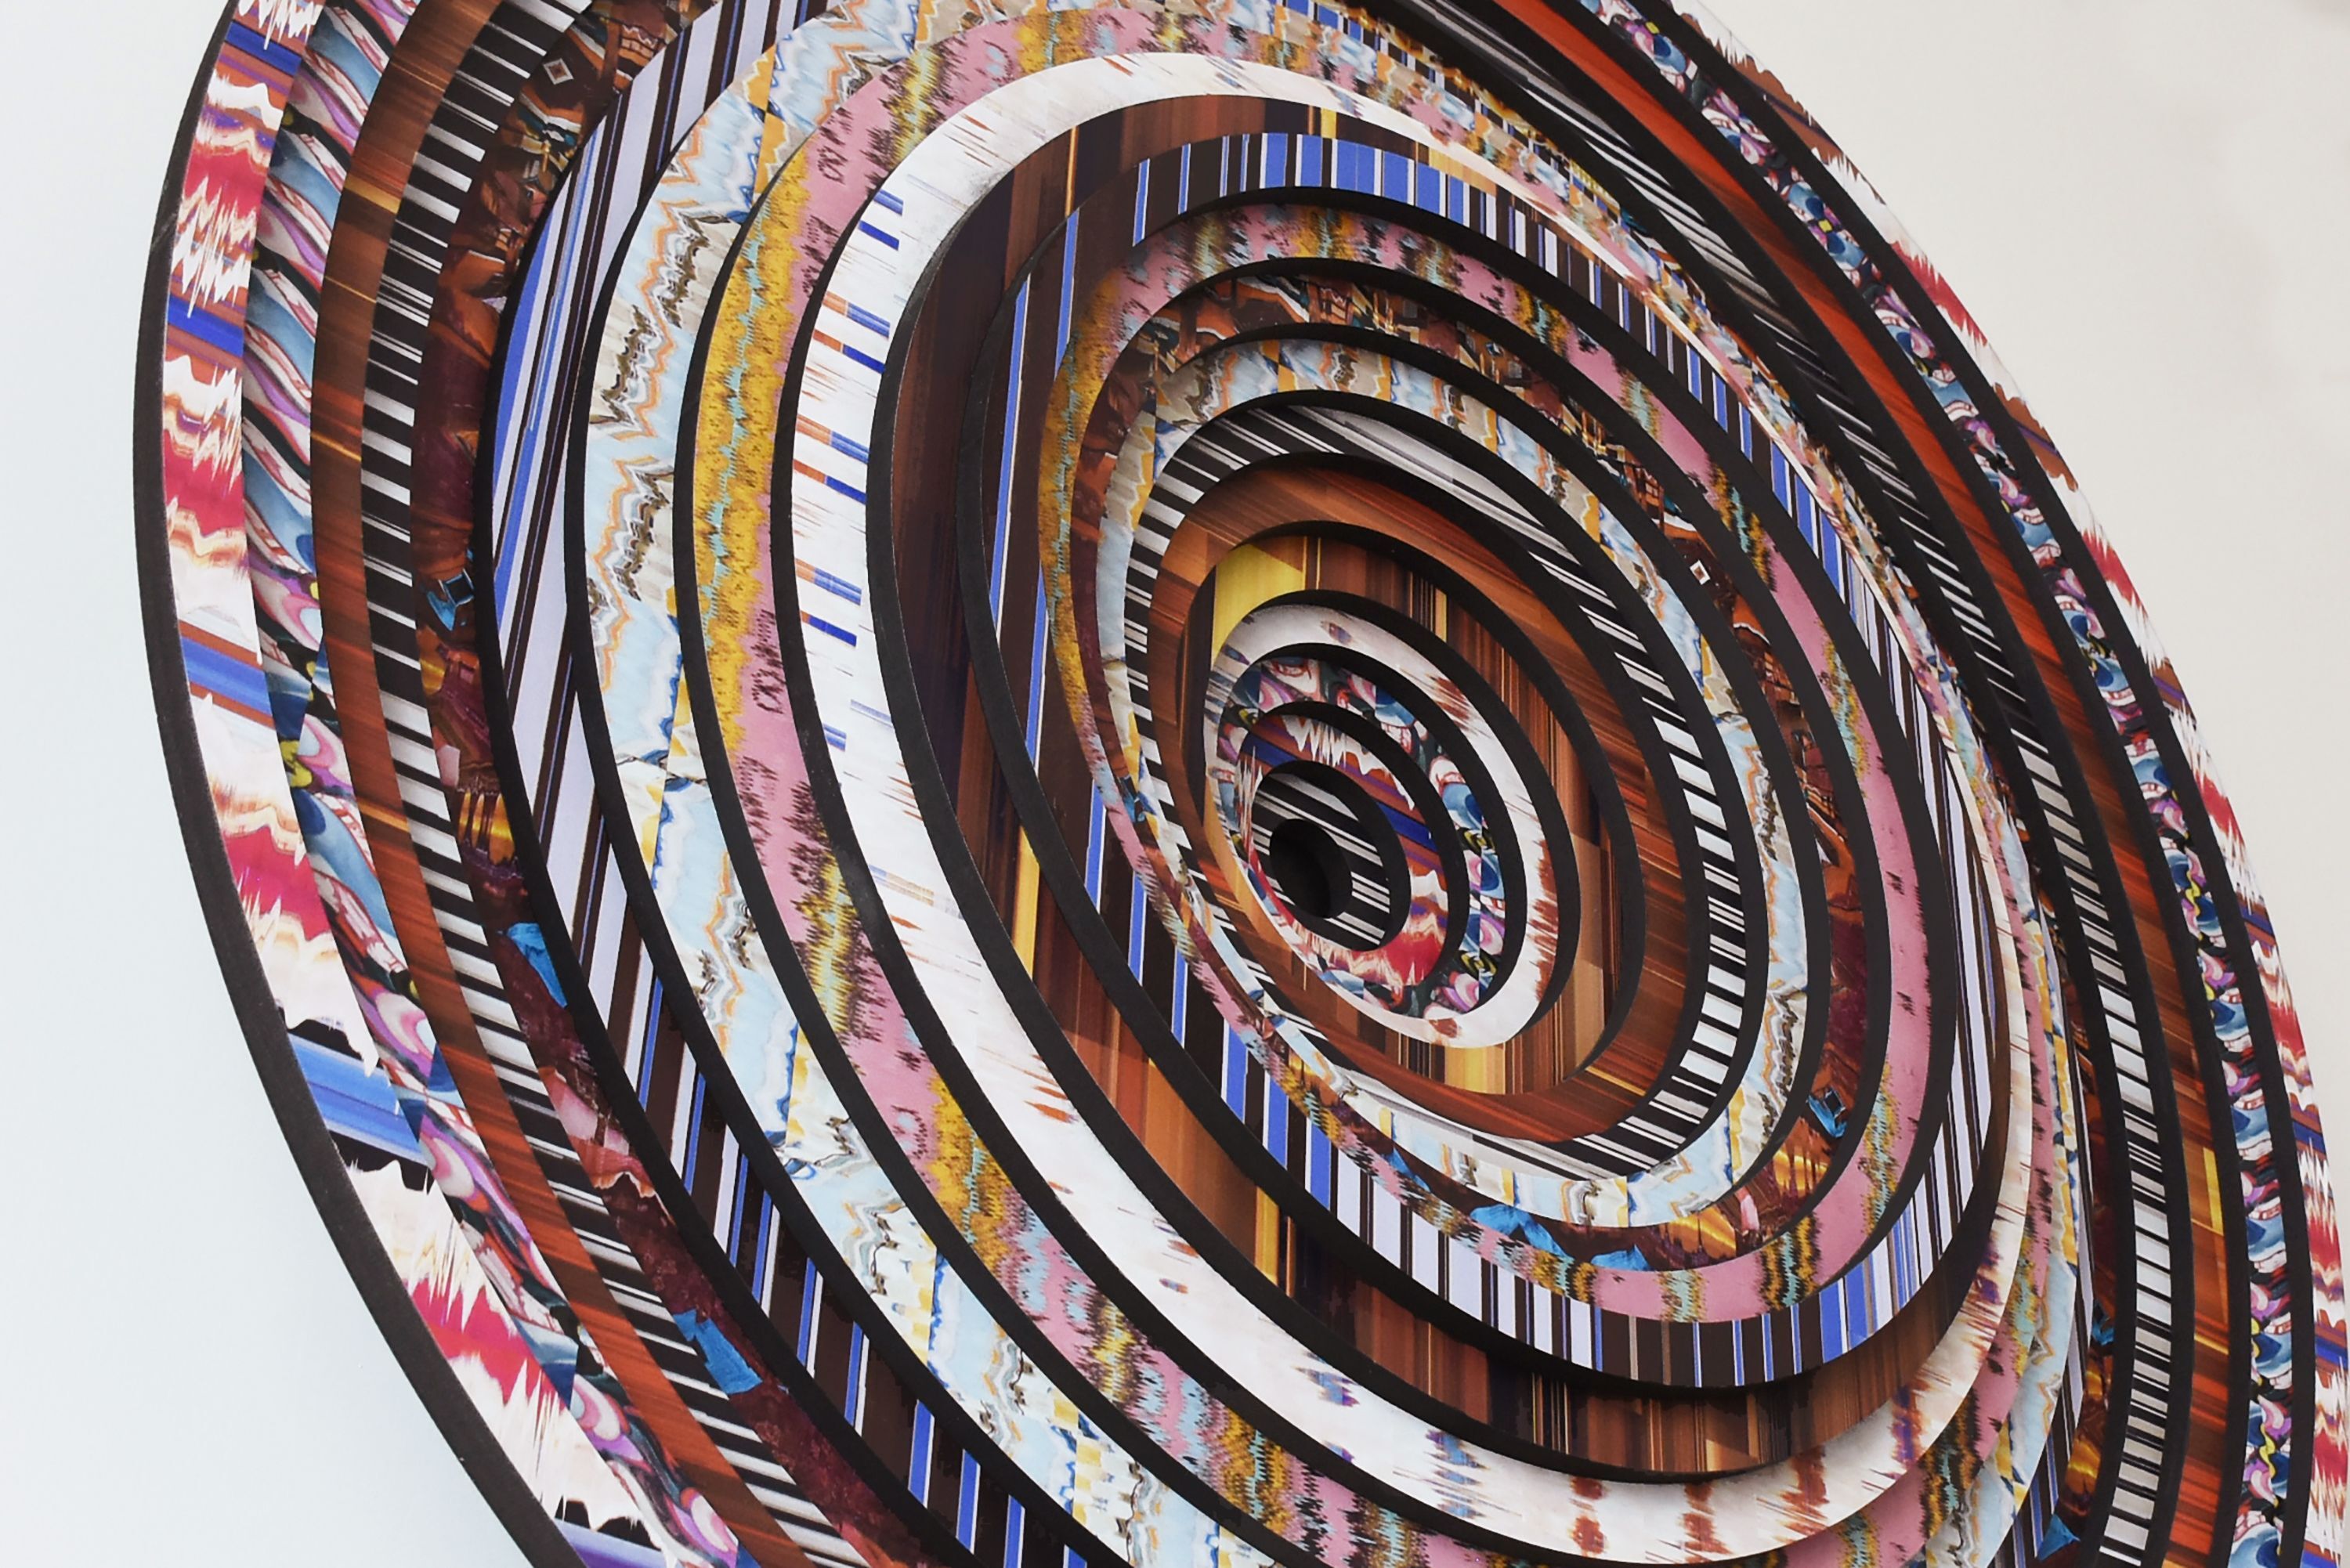 Pump is inspired by human being’s heart. Layers and concentric rings catch viewer’s sight toward the center of the work.